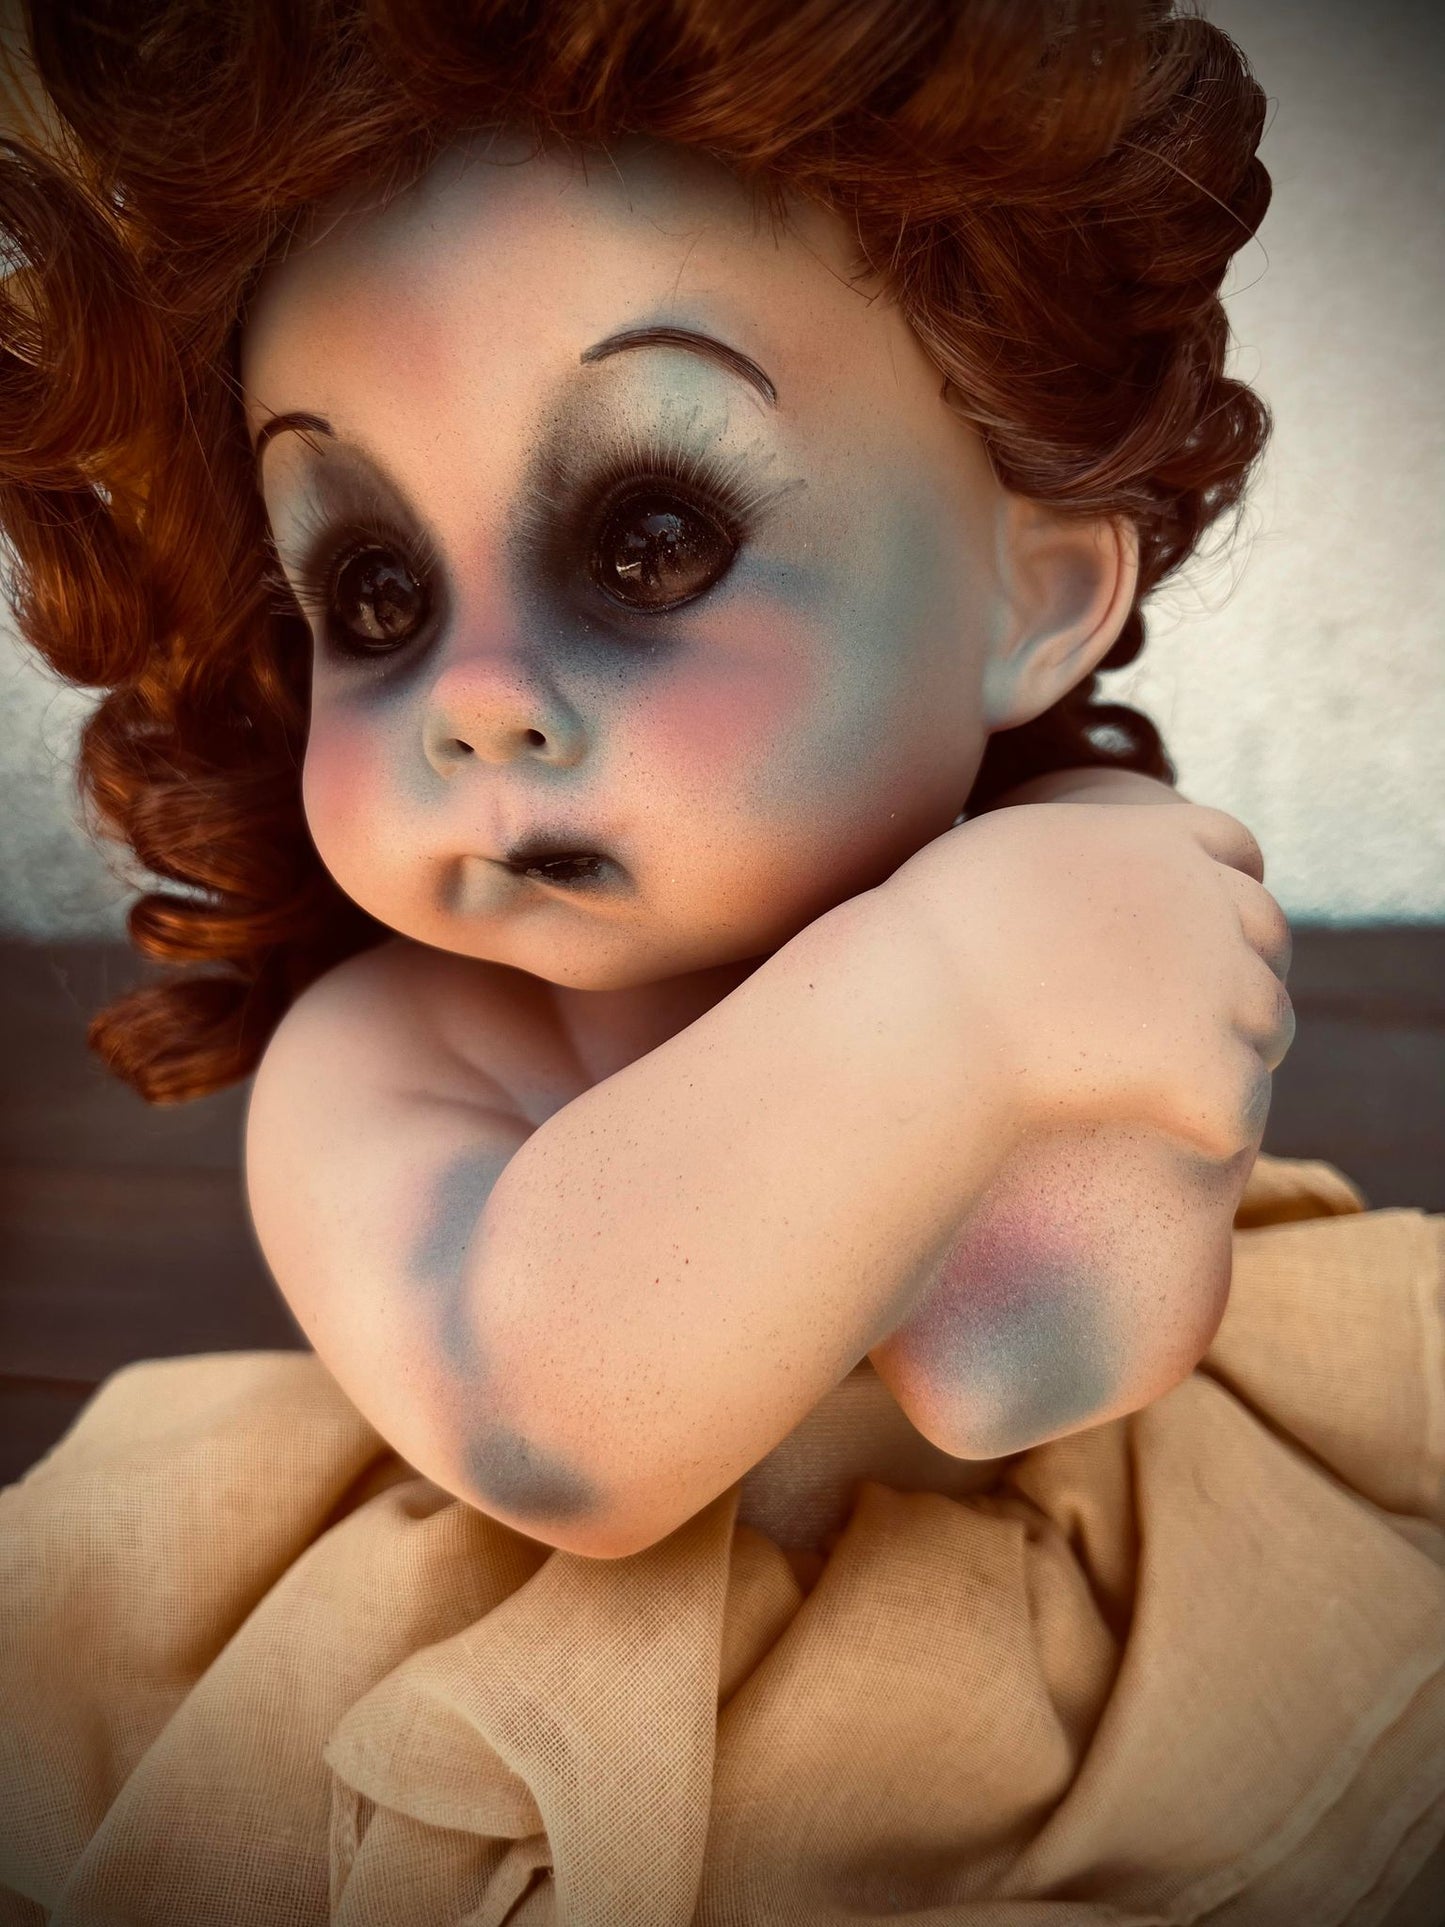 Meet Millie 17" Doll Porcelain Zombie Undead Witchy Creepy Haunted Spirit Infected Scary Spooky Possessed Positive Oddity Gift Idea